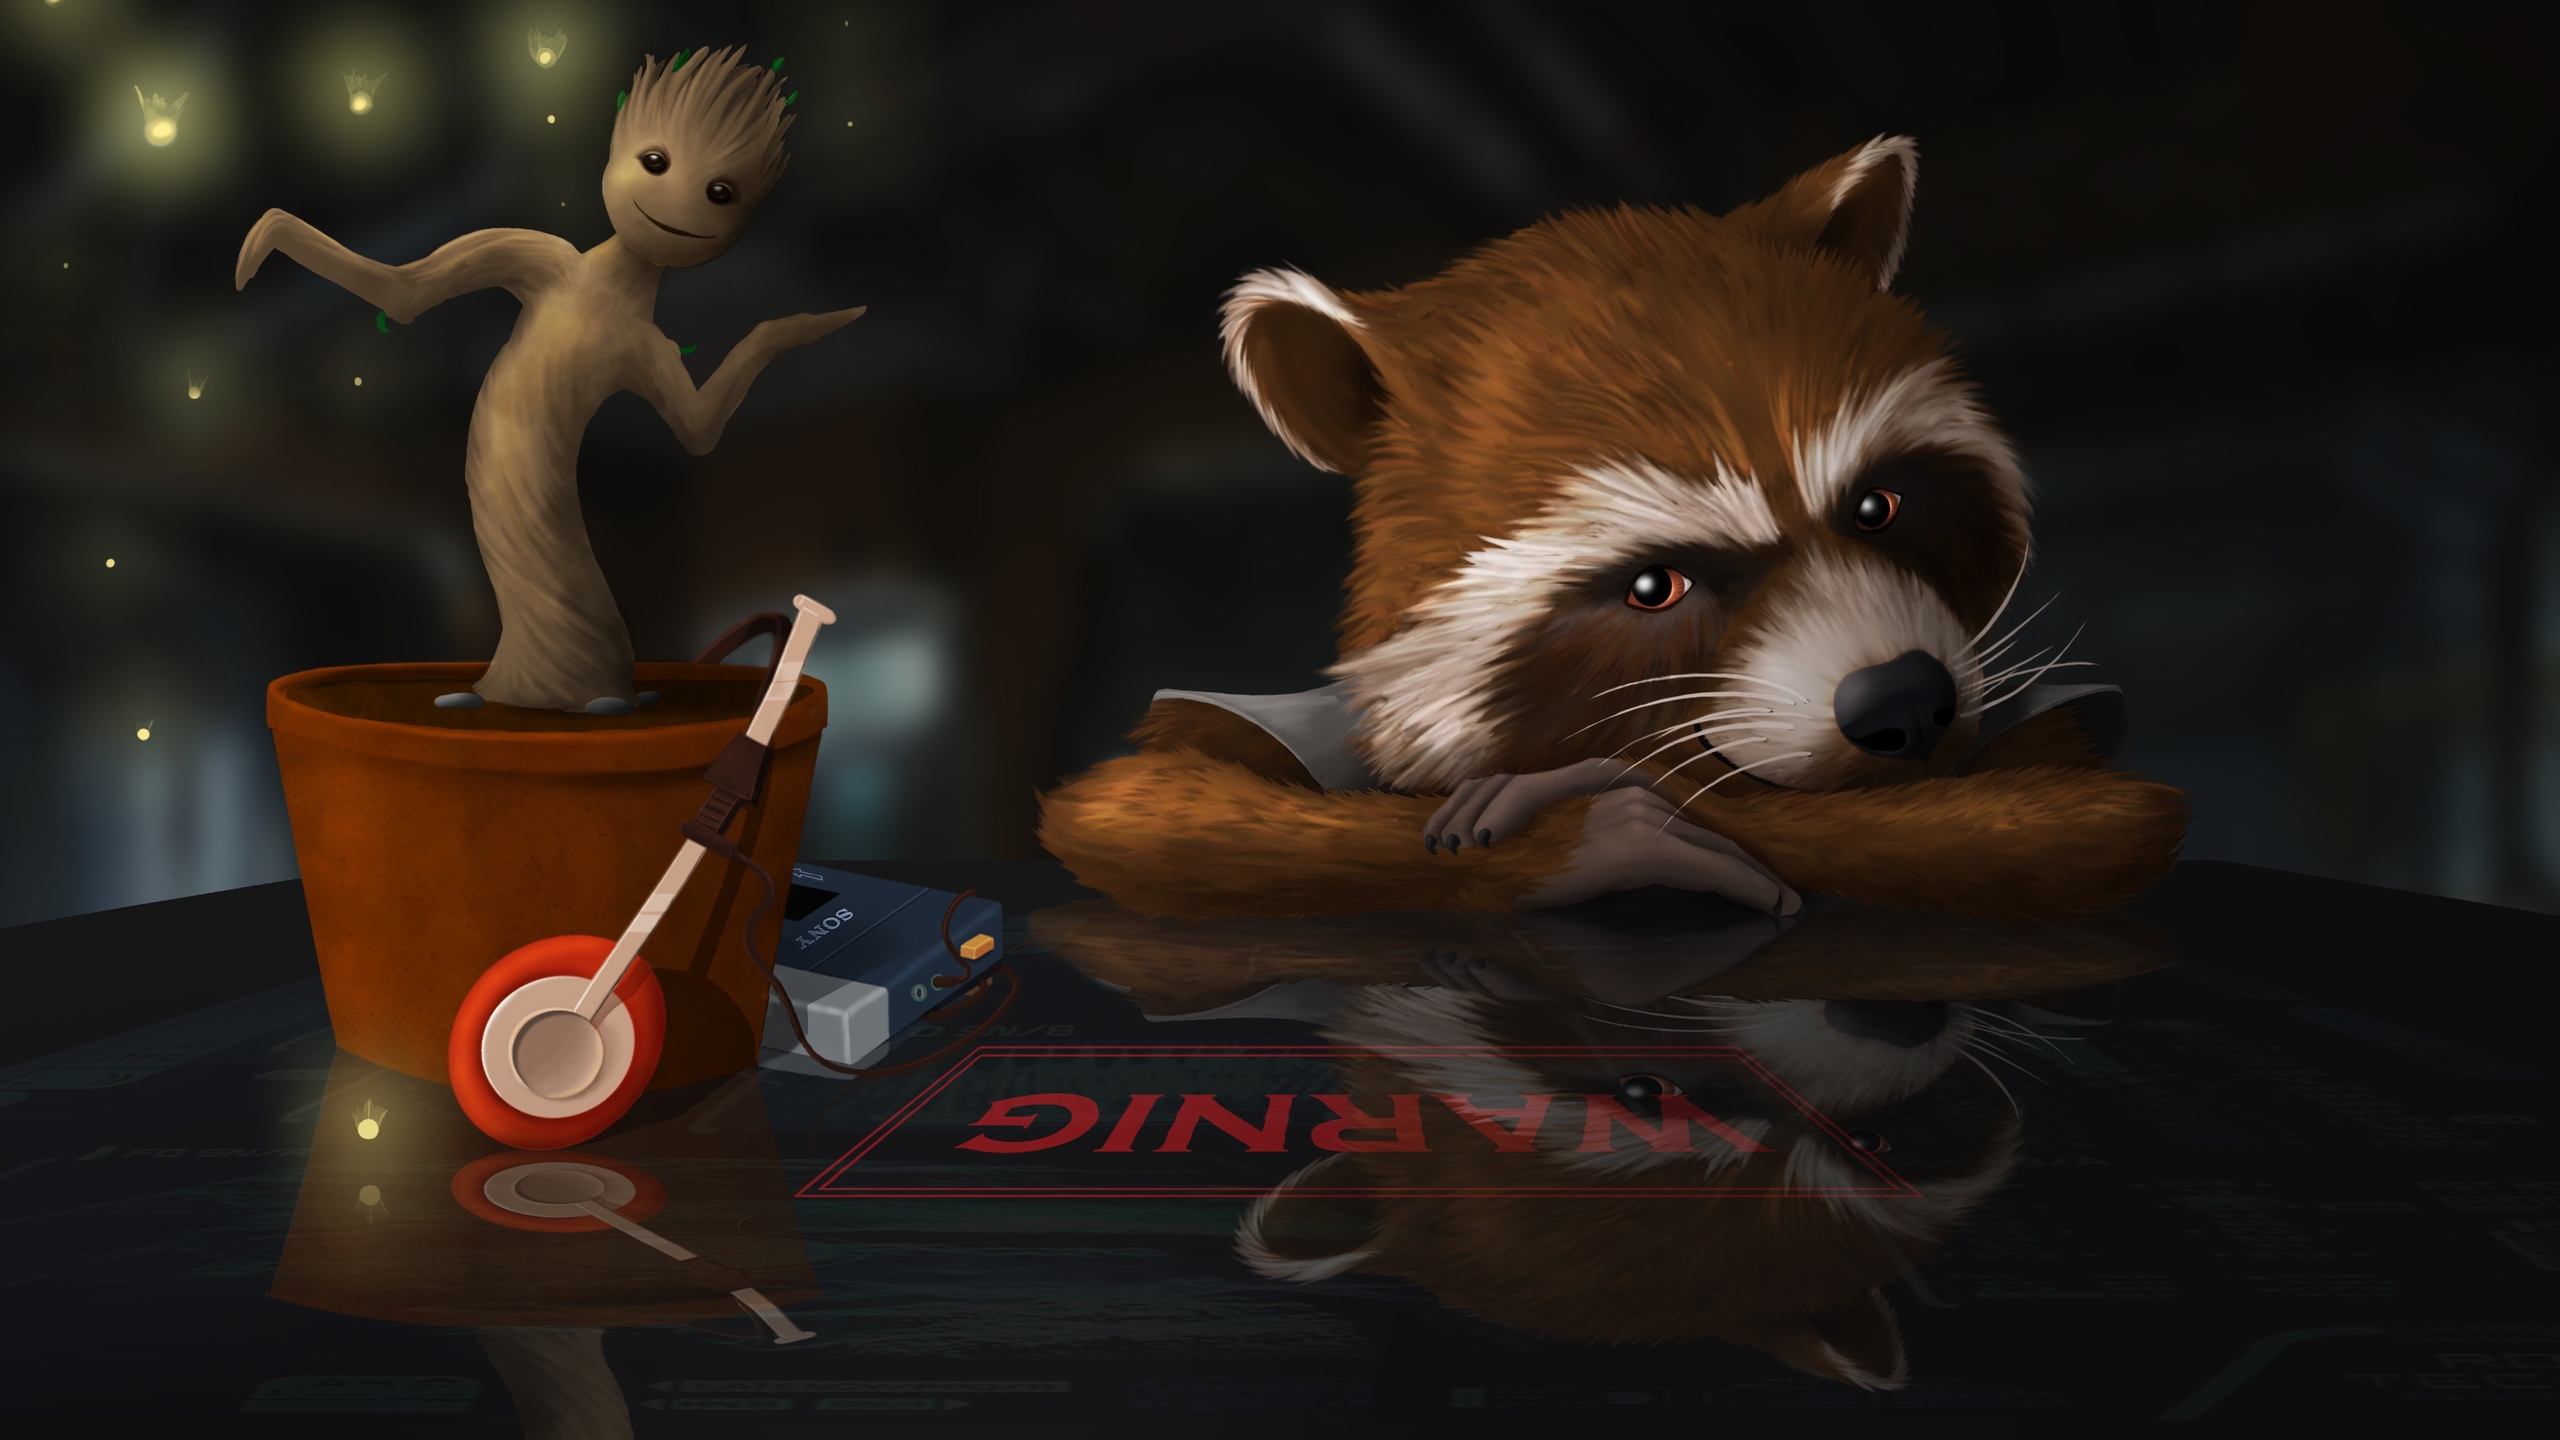 Guardians of the Galaxy Raccoon  for 2560x1440 HDTV resolution